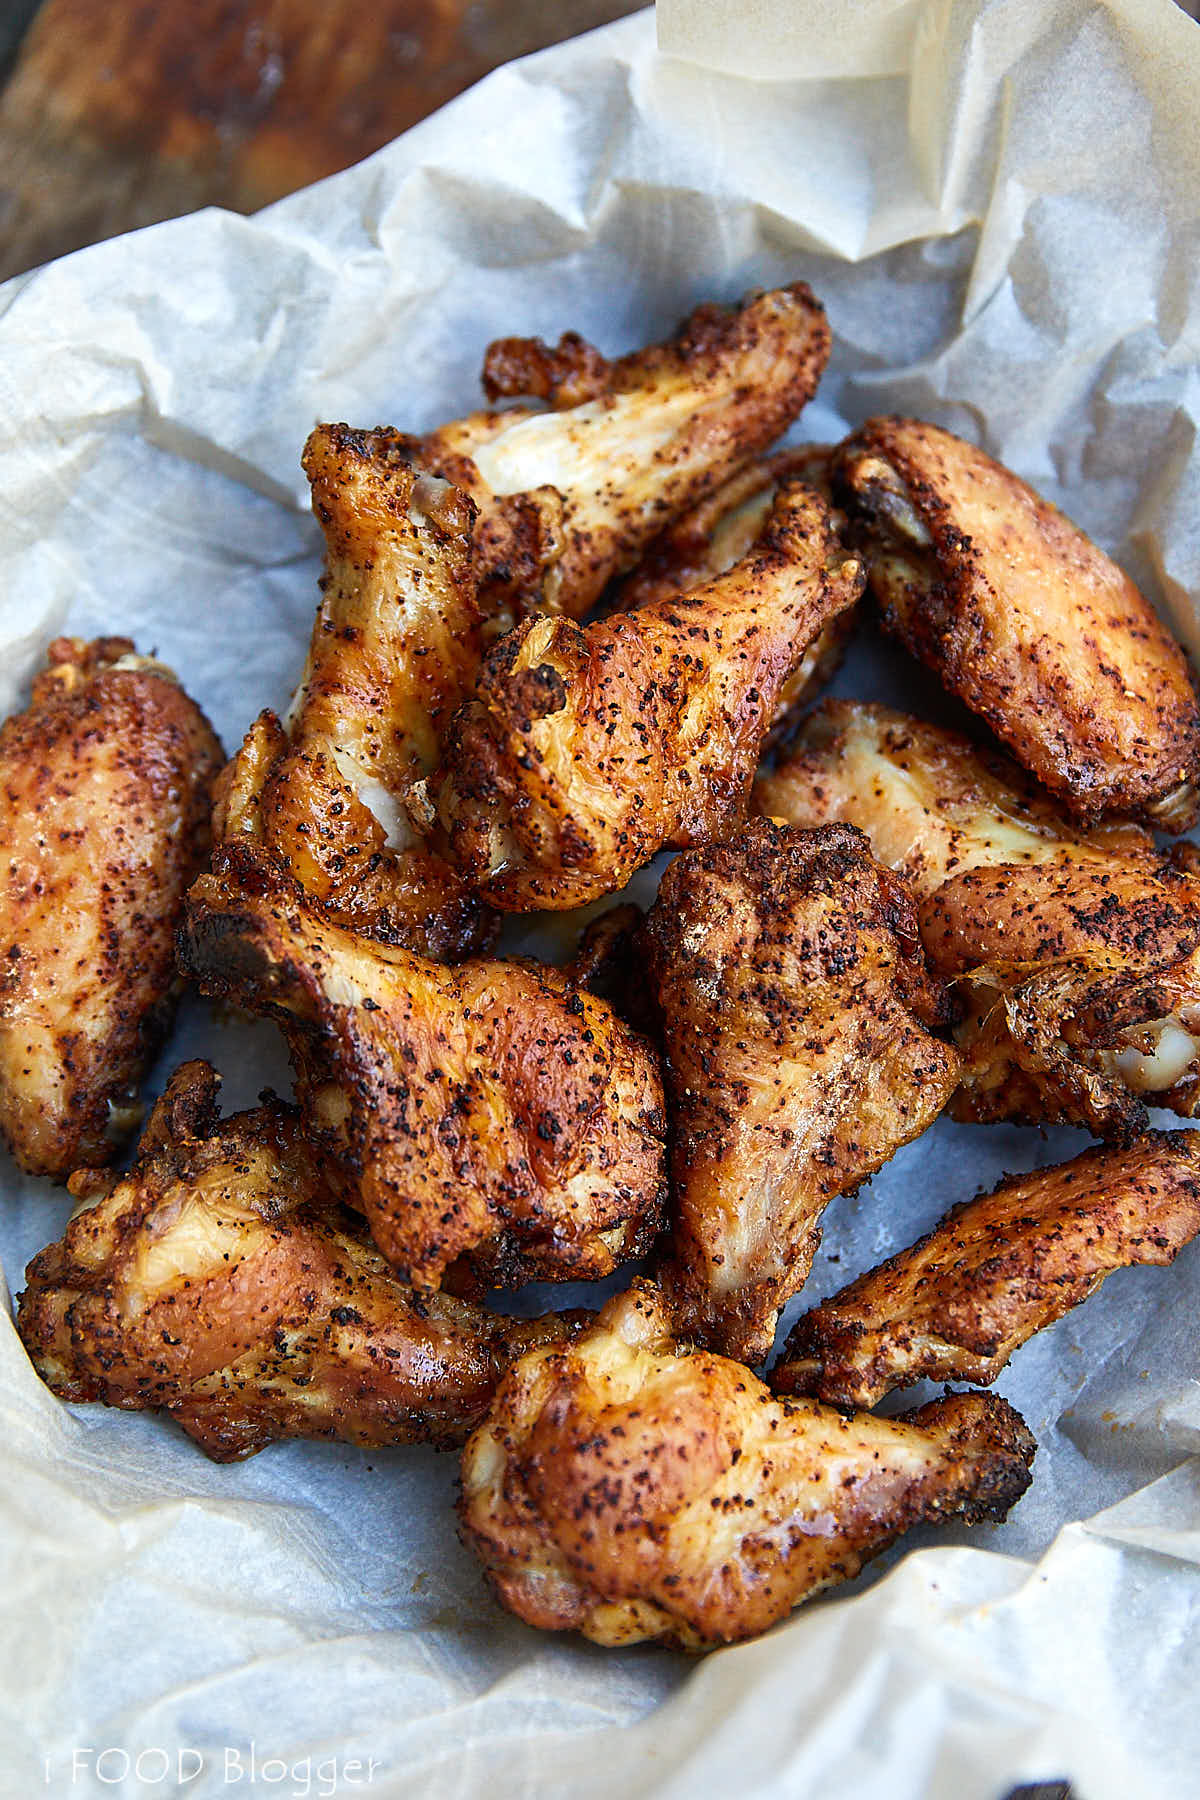 Top down view of very crispy, golden-brown chicken wings in a basket lined with wax paper.